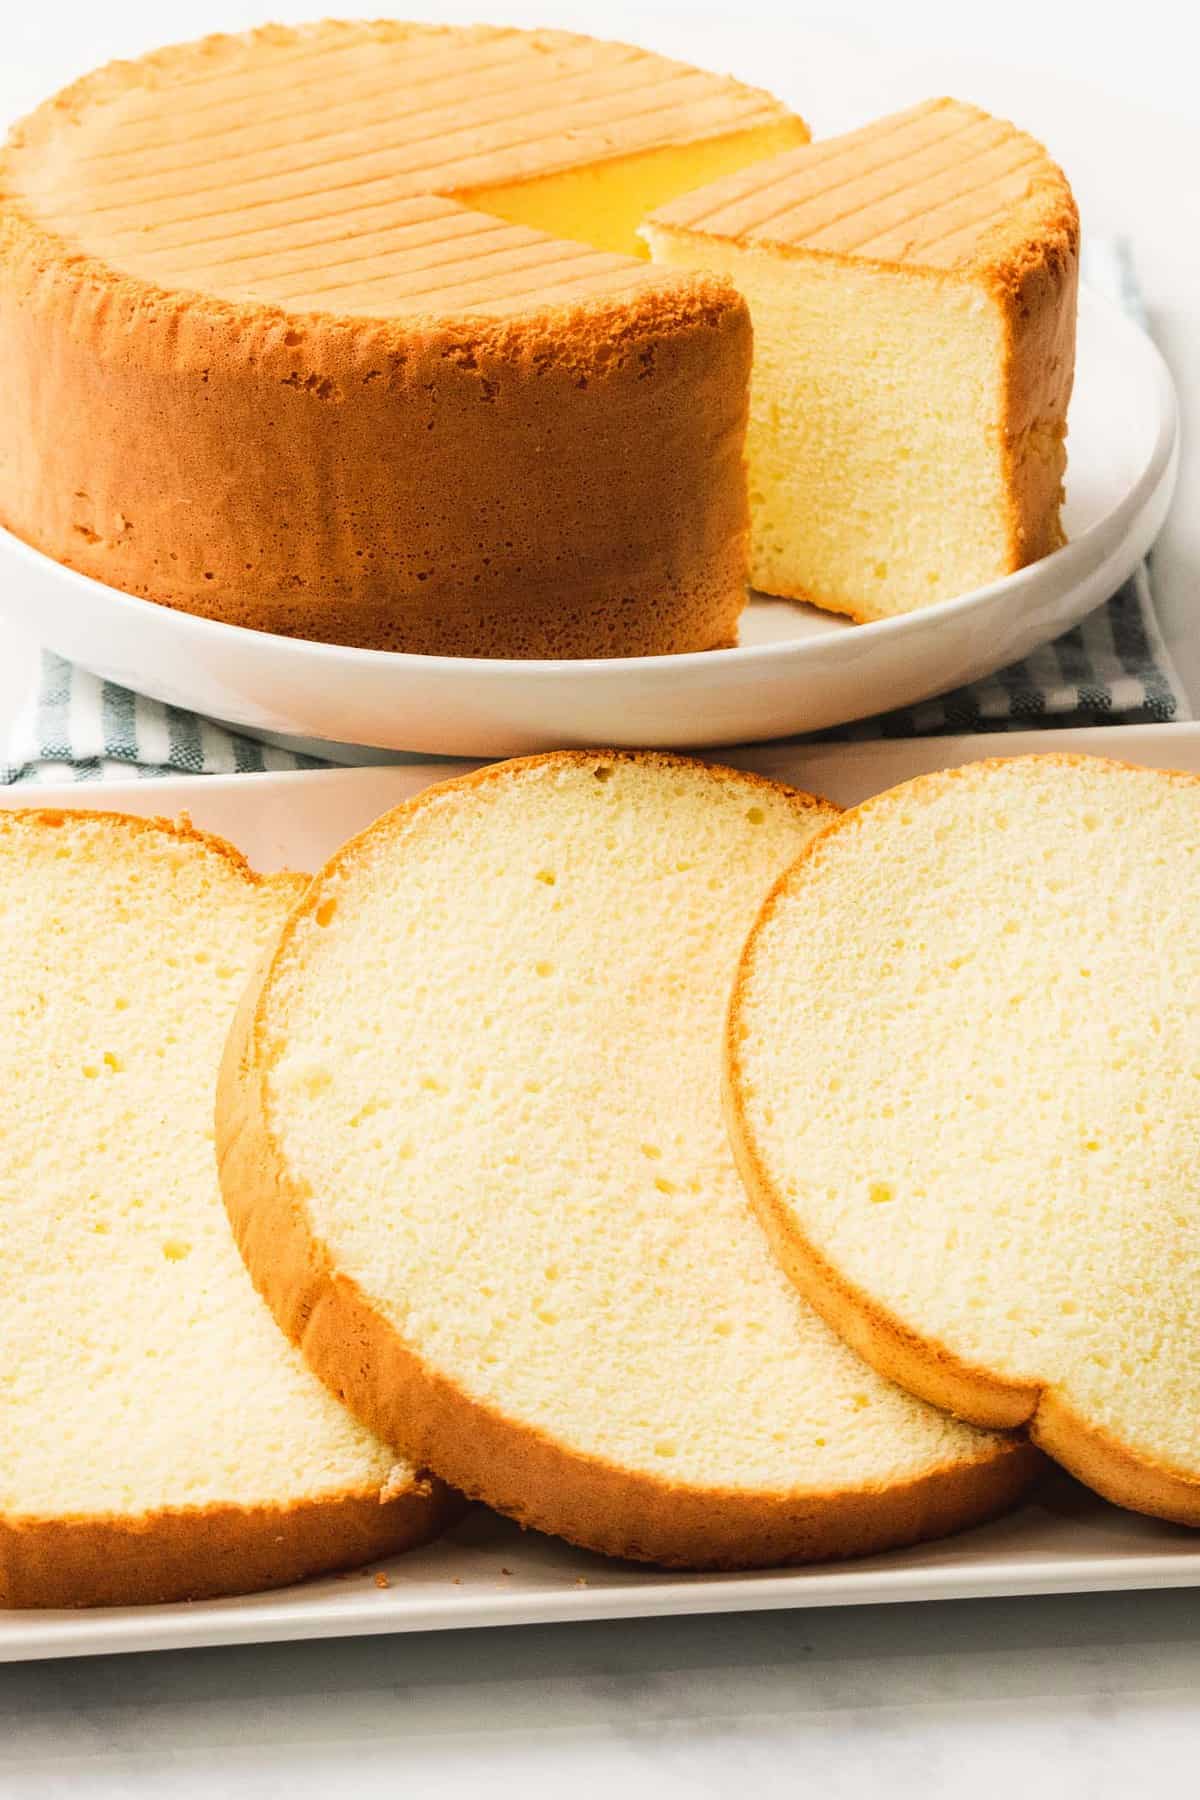 Easy sponge cake with soft, light texture sliced into layers.